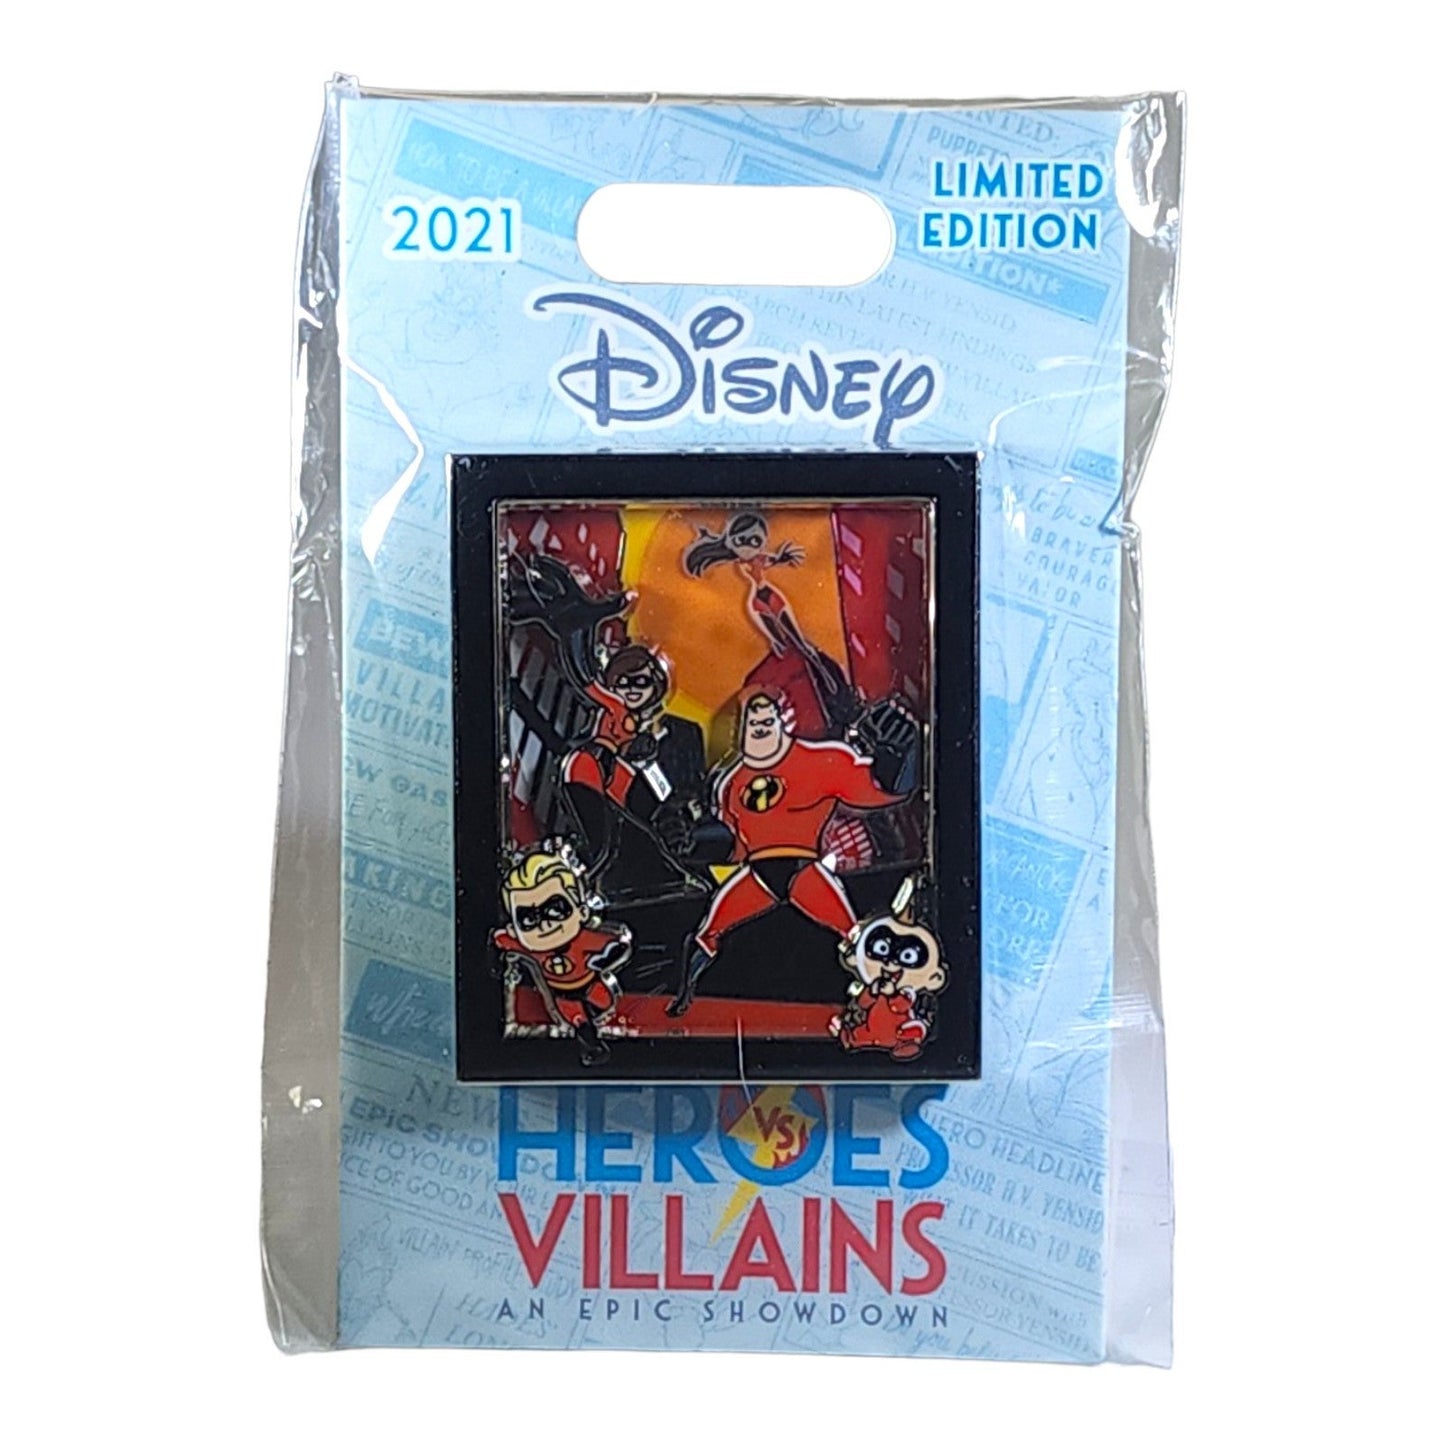 The Incredibles Multi-Plane Series - Heroes vs Villains Pin Event - Limited Edition 1000